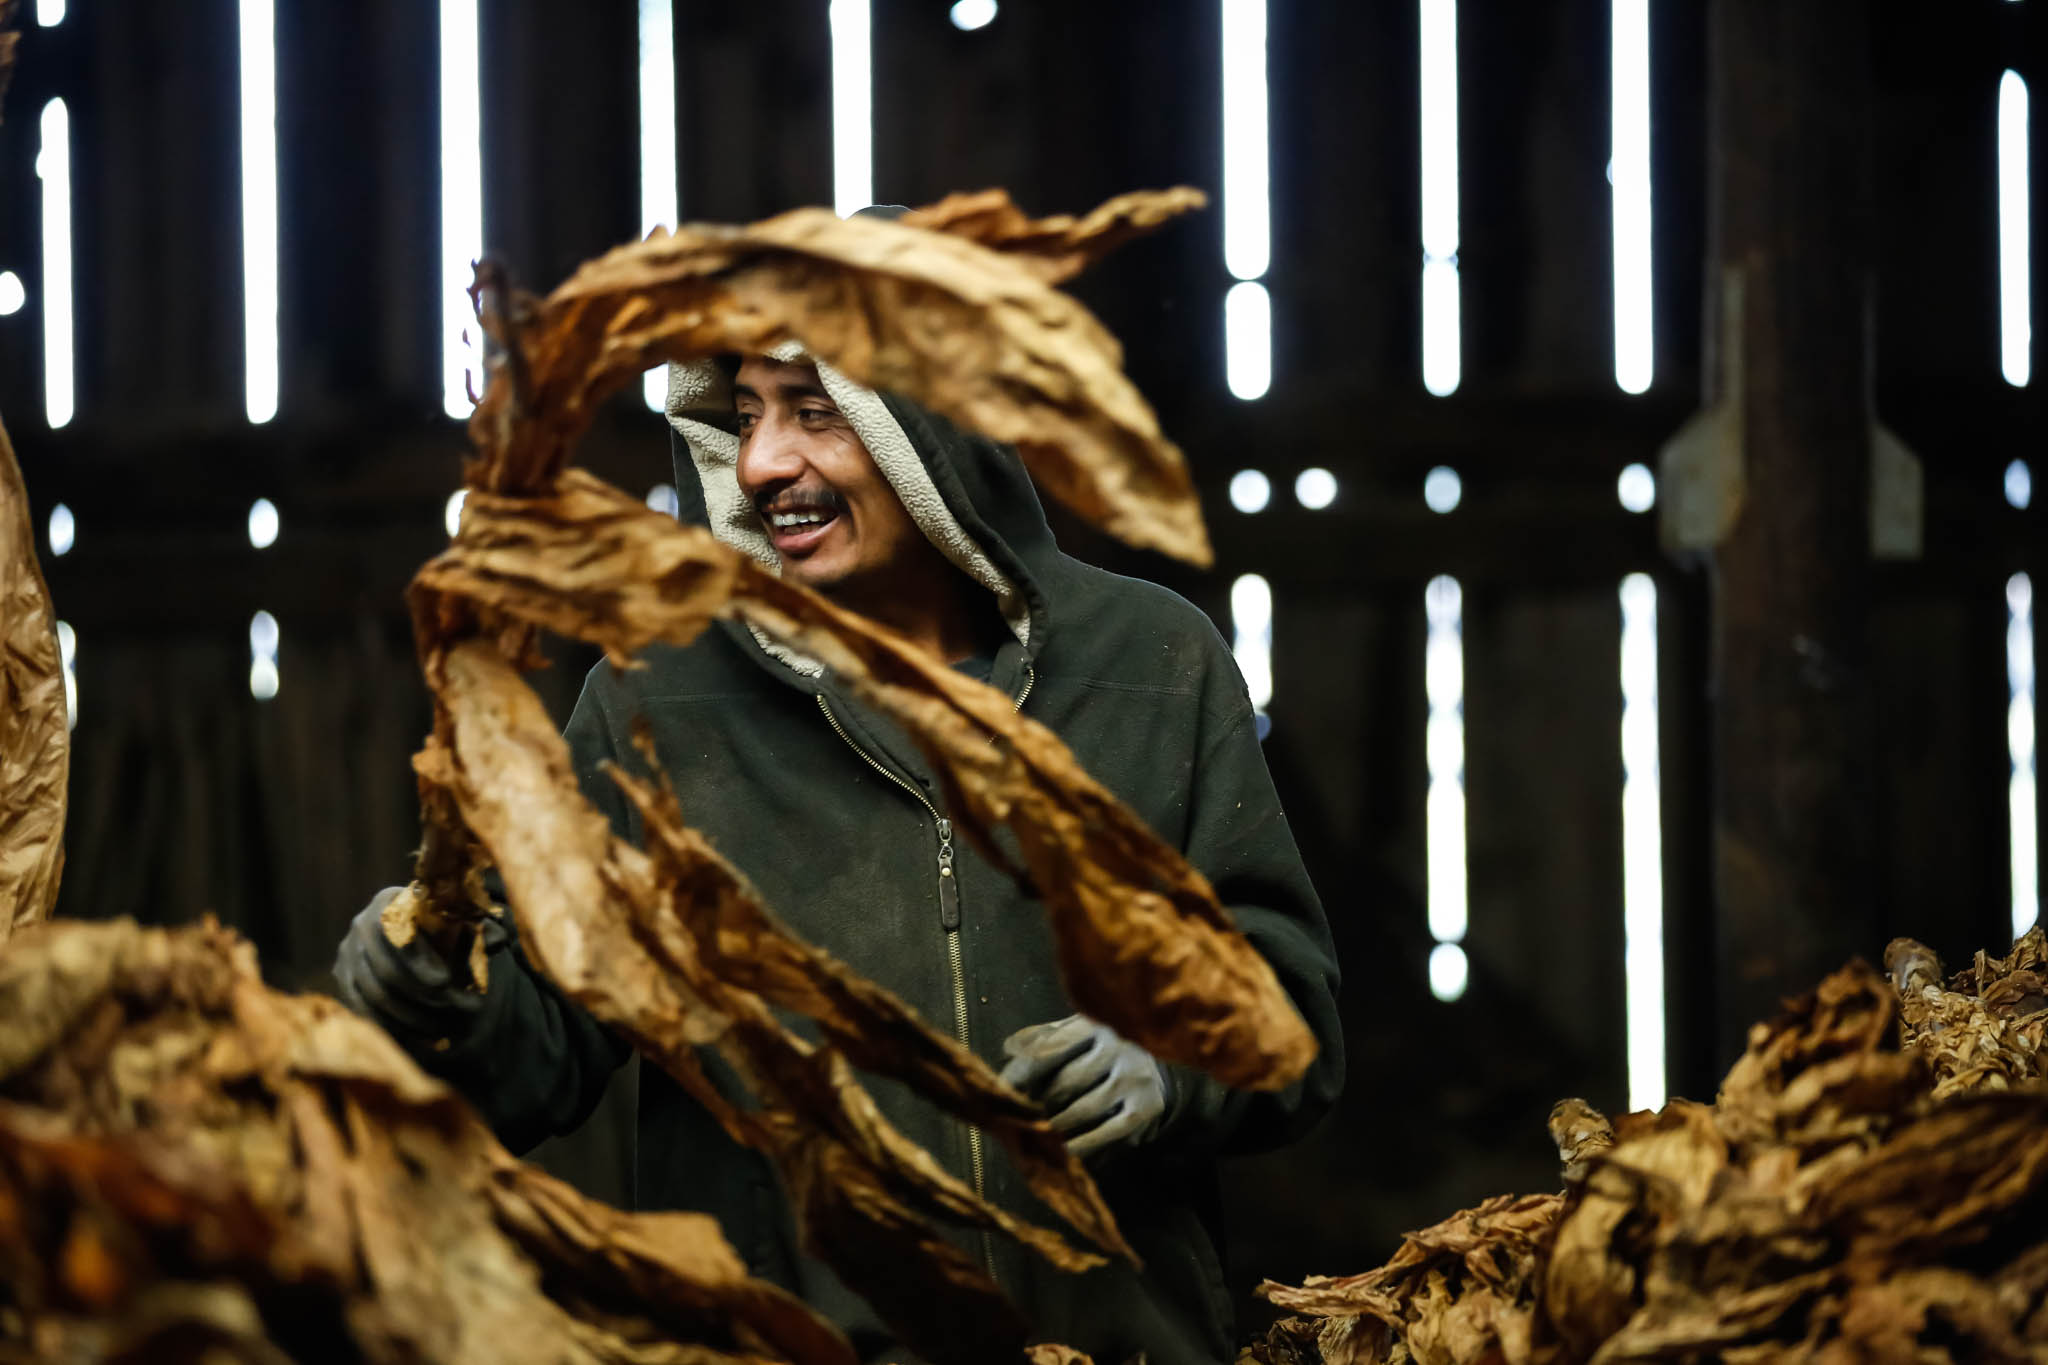   Migrant workers tell jokes as they strip leaves from the tobacco stalk in Midway, Kentucky. There are three grades of leaves on a tobacco stalk that are separated for processing.  